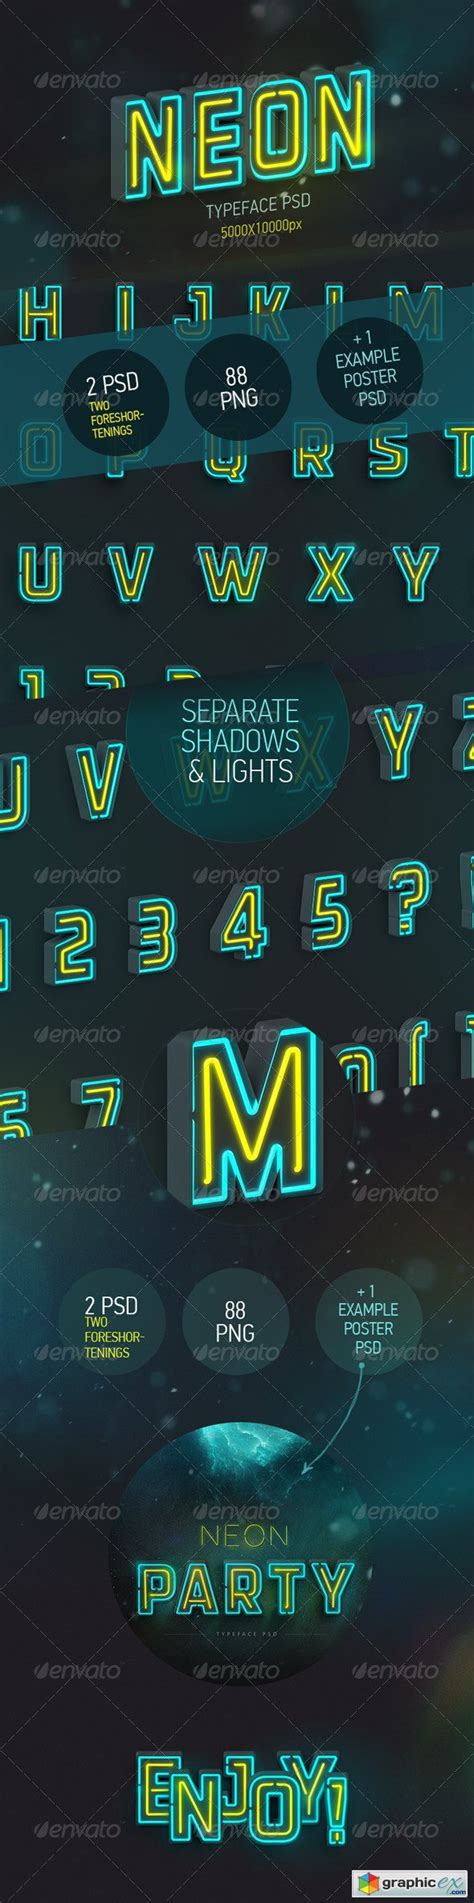 Neon Typeface 3 Psd 88 Png Free Download Vector Stock Image